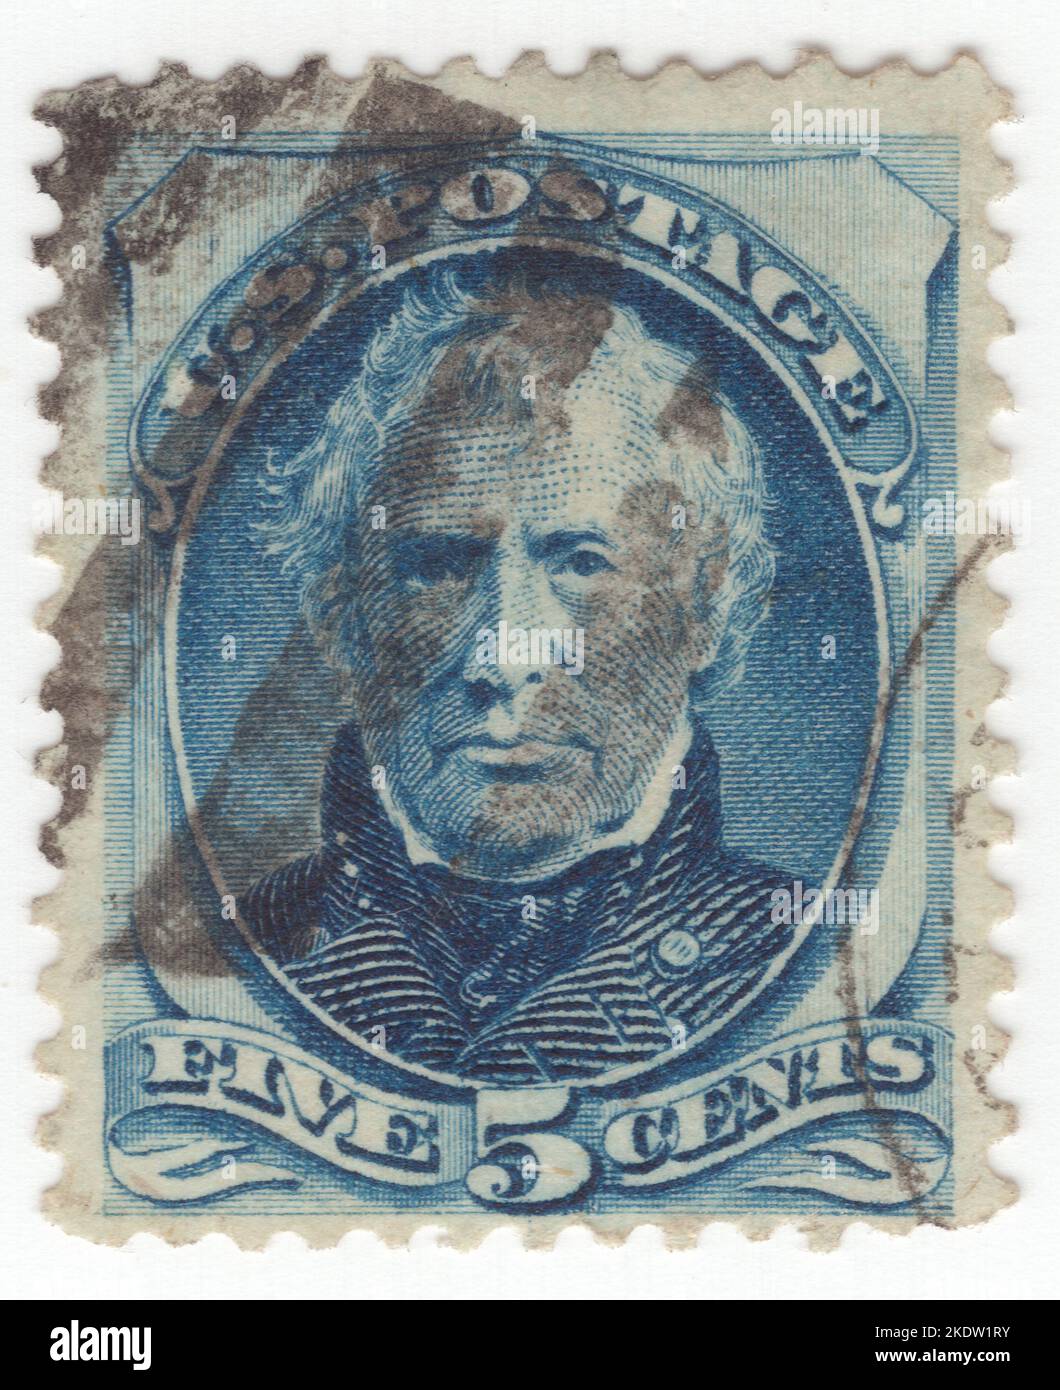 USA - 1879: An 5 cents blue postage stamp depicting portrait of Zachary Taylor, American military leader who served as the 12th president of the United States from 1849 until his death in 1850. Taylor previously was a career officer in the United States Army, rising to the rank of major general and becoming a national hero as a result of his victories in the Mexican–American War. As a result, he won election to the White House despite his vague political beliefs. His top priority as president was preserving the Union. He died 16 months into his term Stock Photo